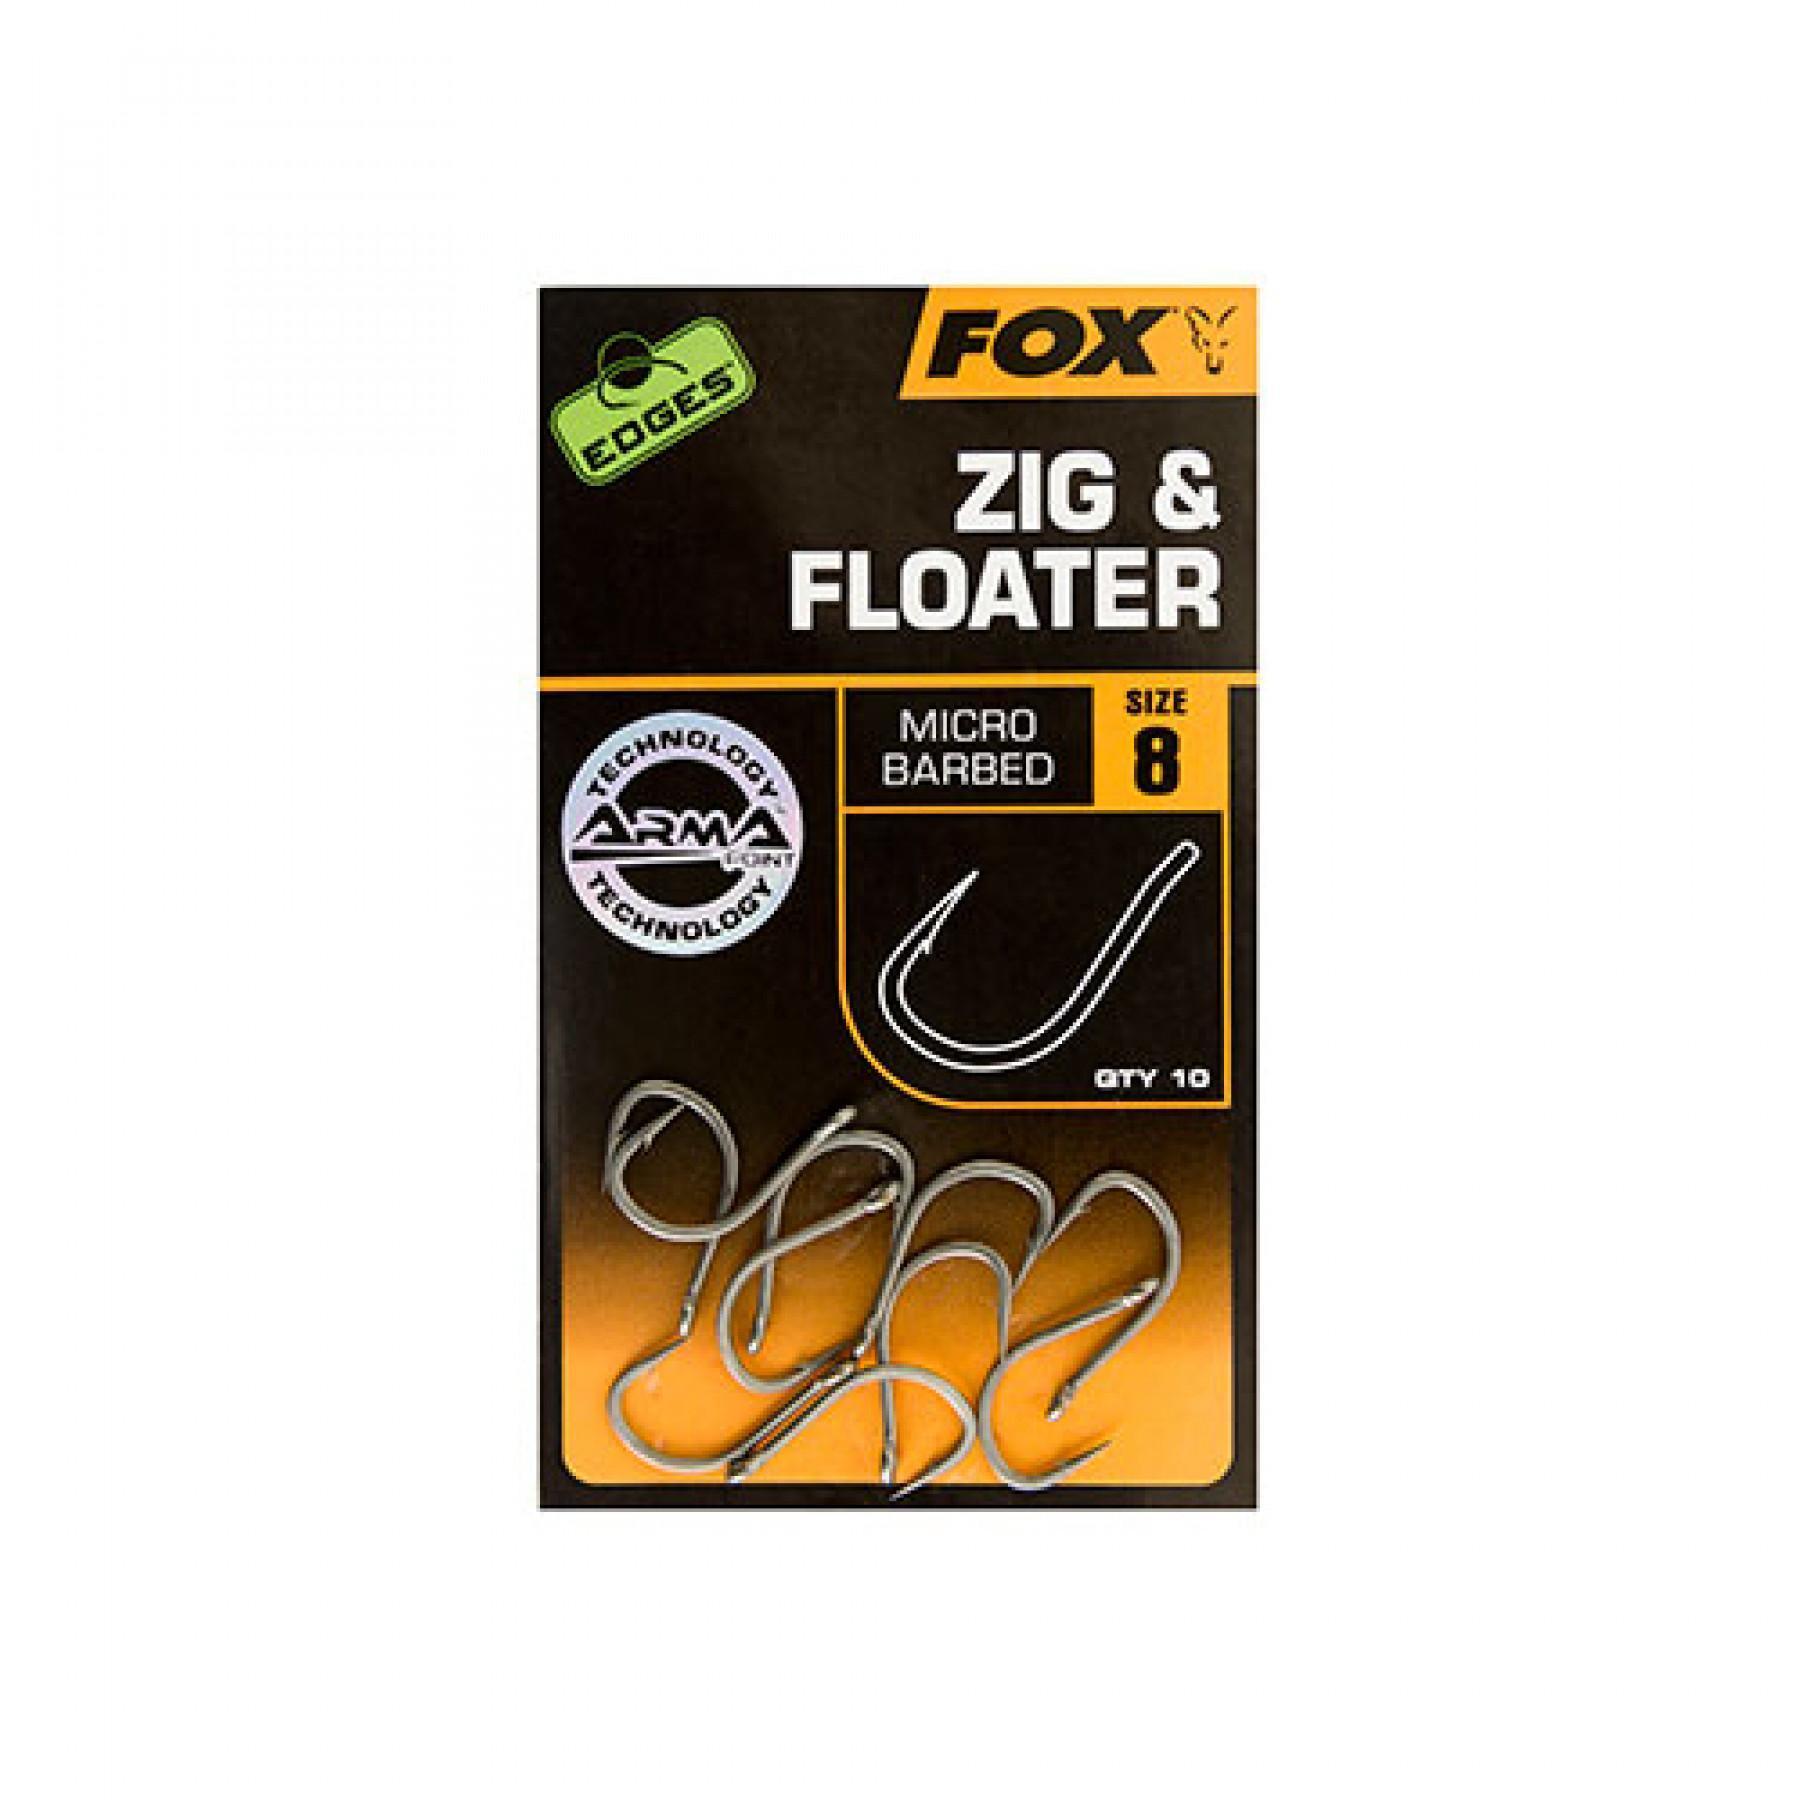 Gancho Fox Zig & Floater Edges taille 10